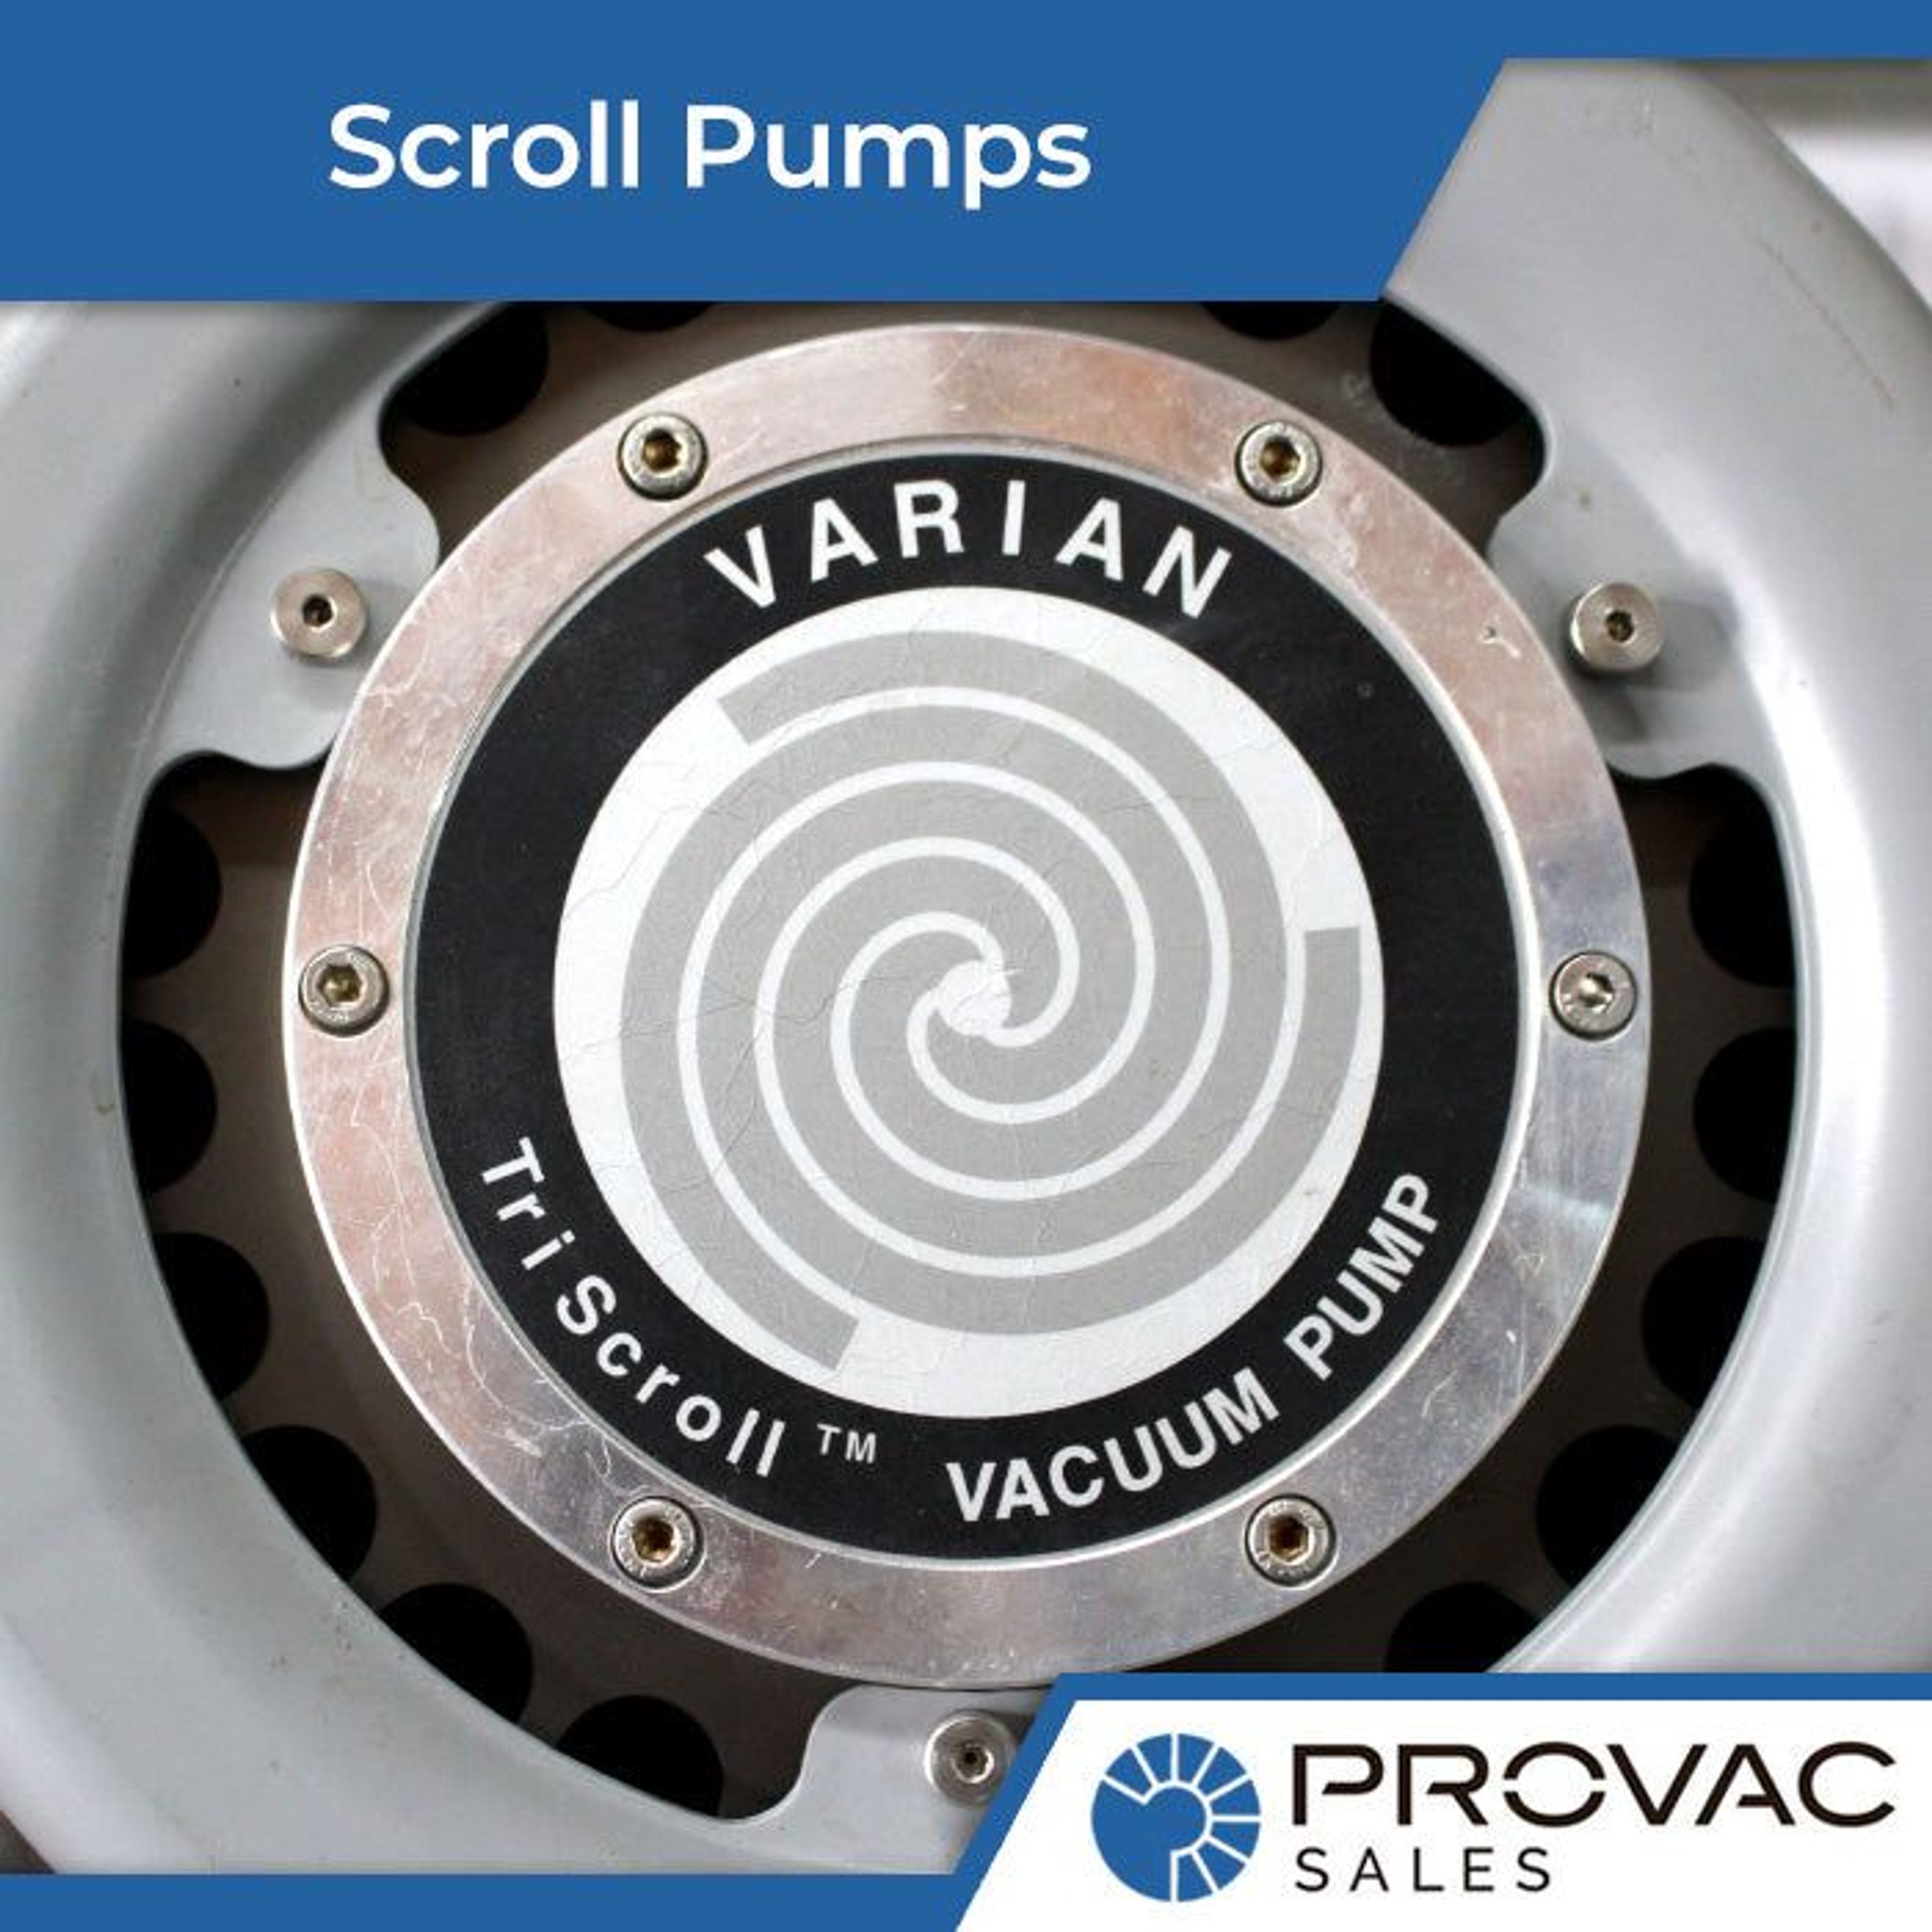 Scroll Vacuum Pumps - Introduction & Guide Background